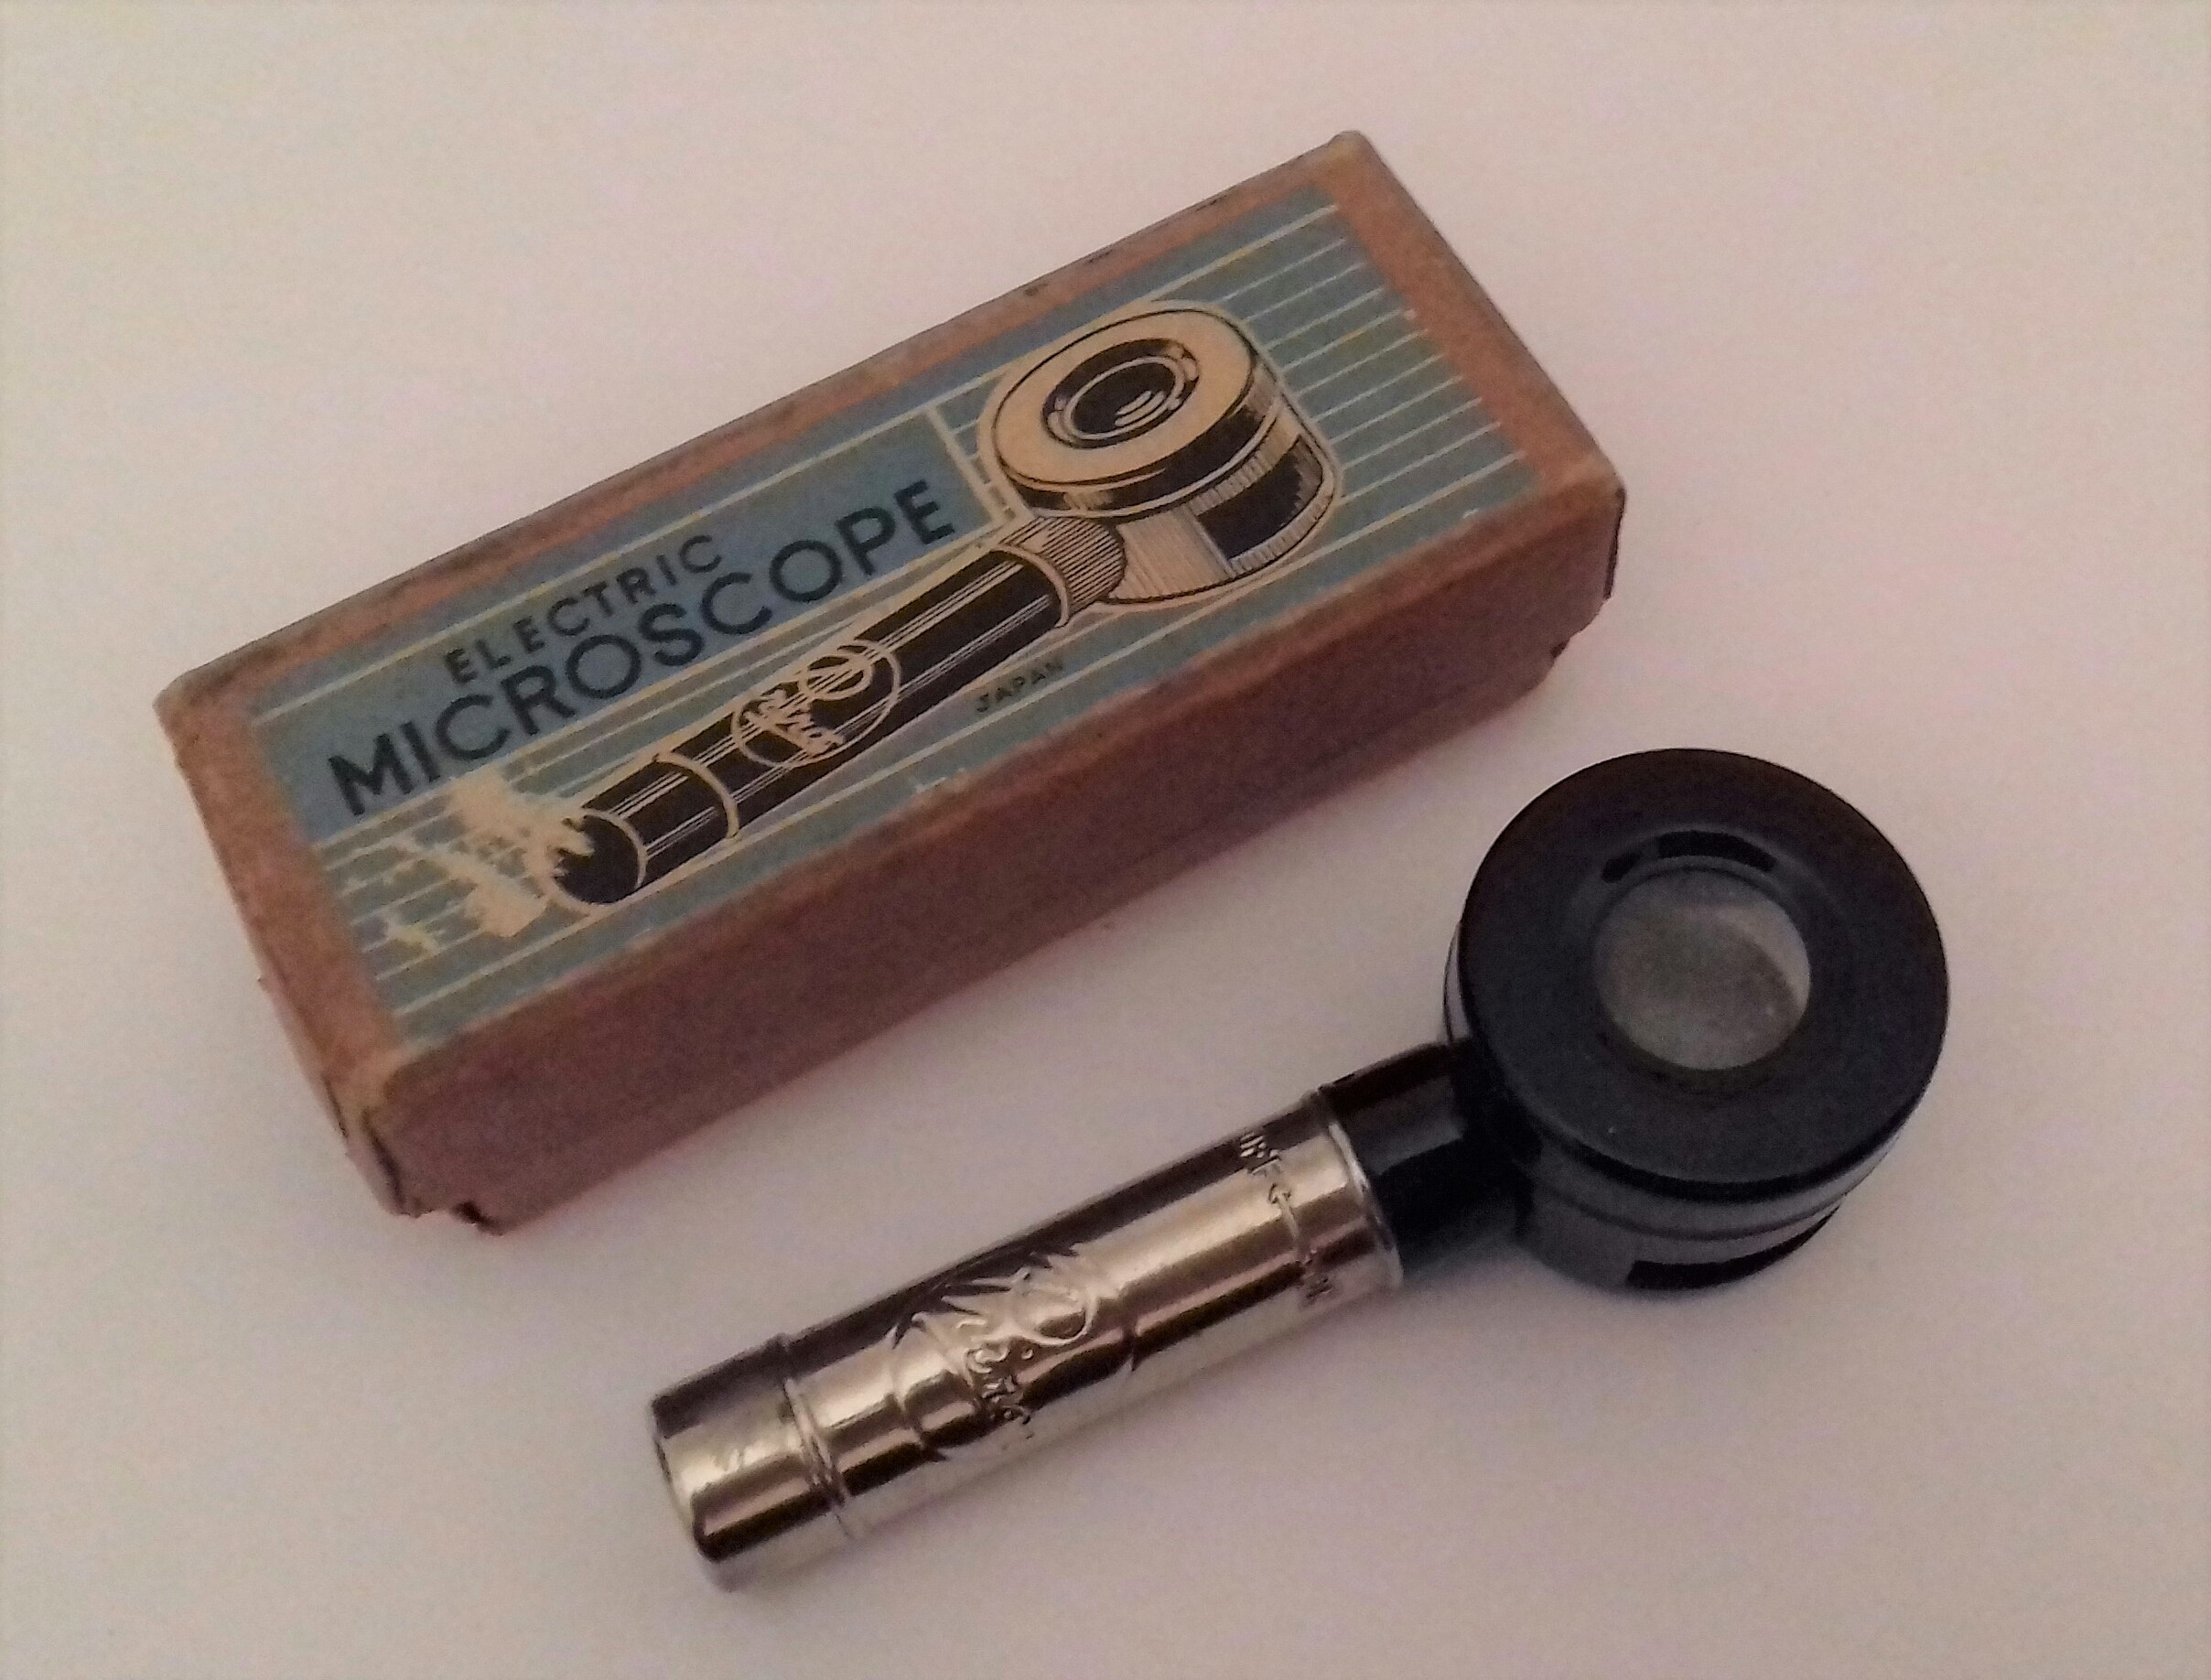 A toy microscope that is a small round lens on a handle